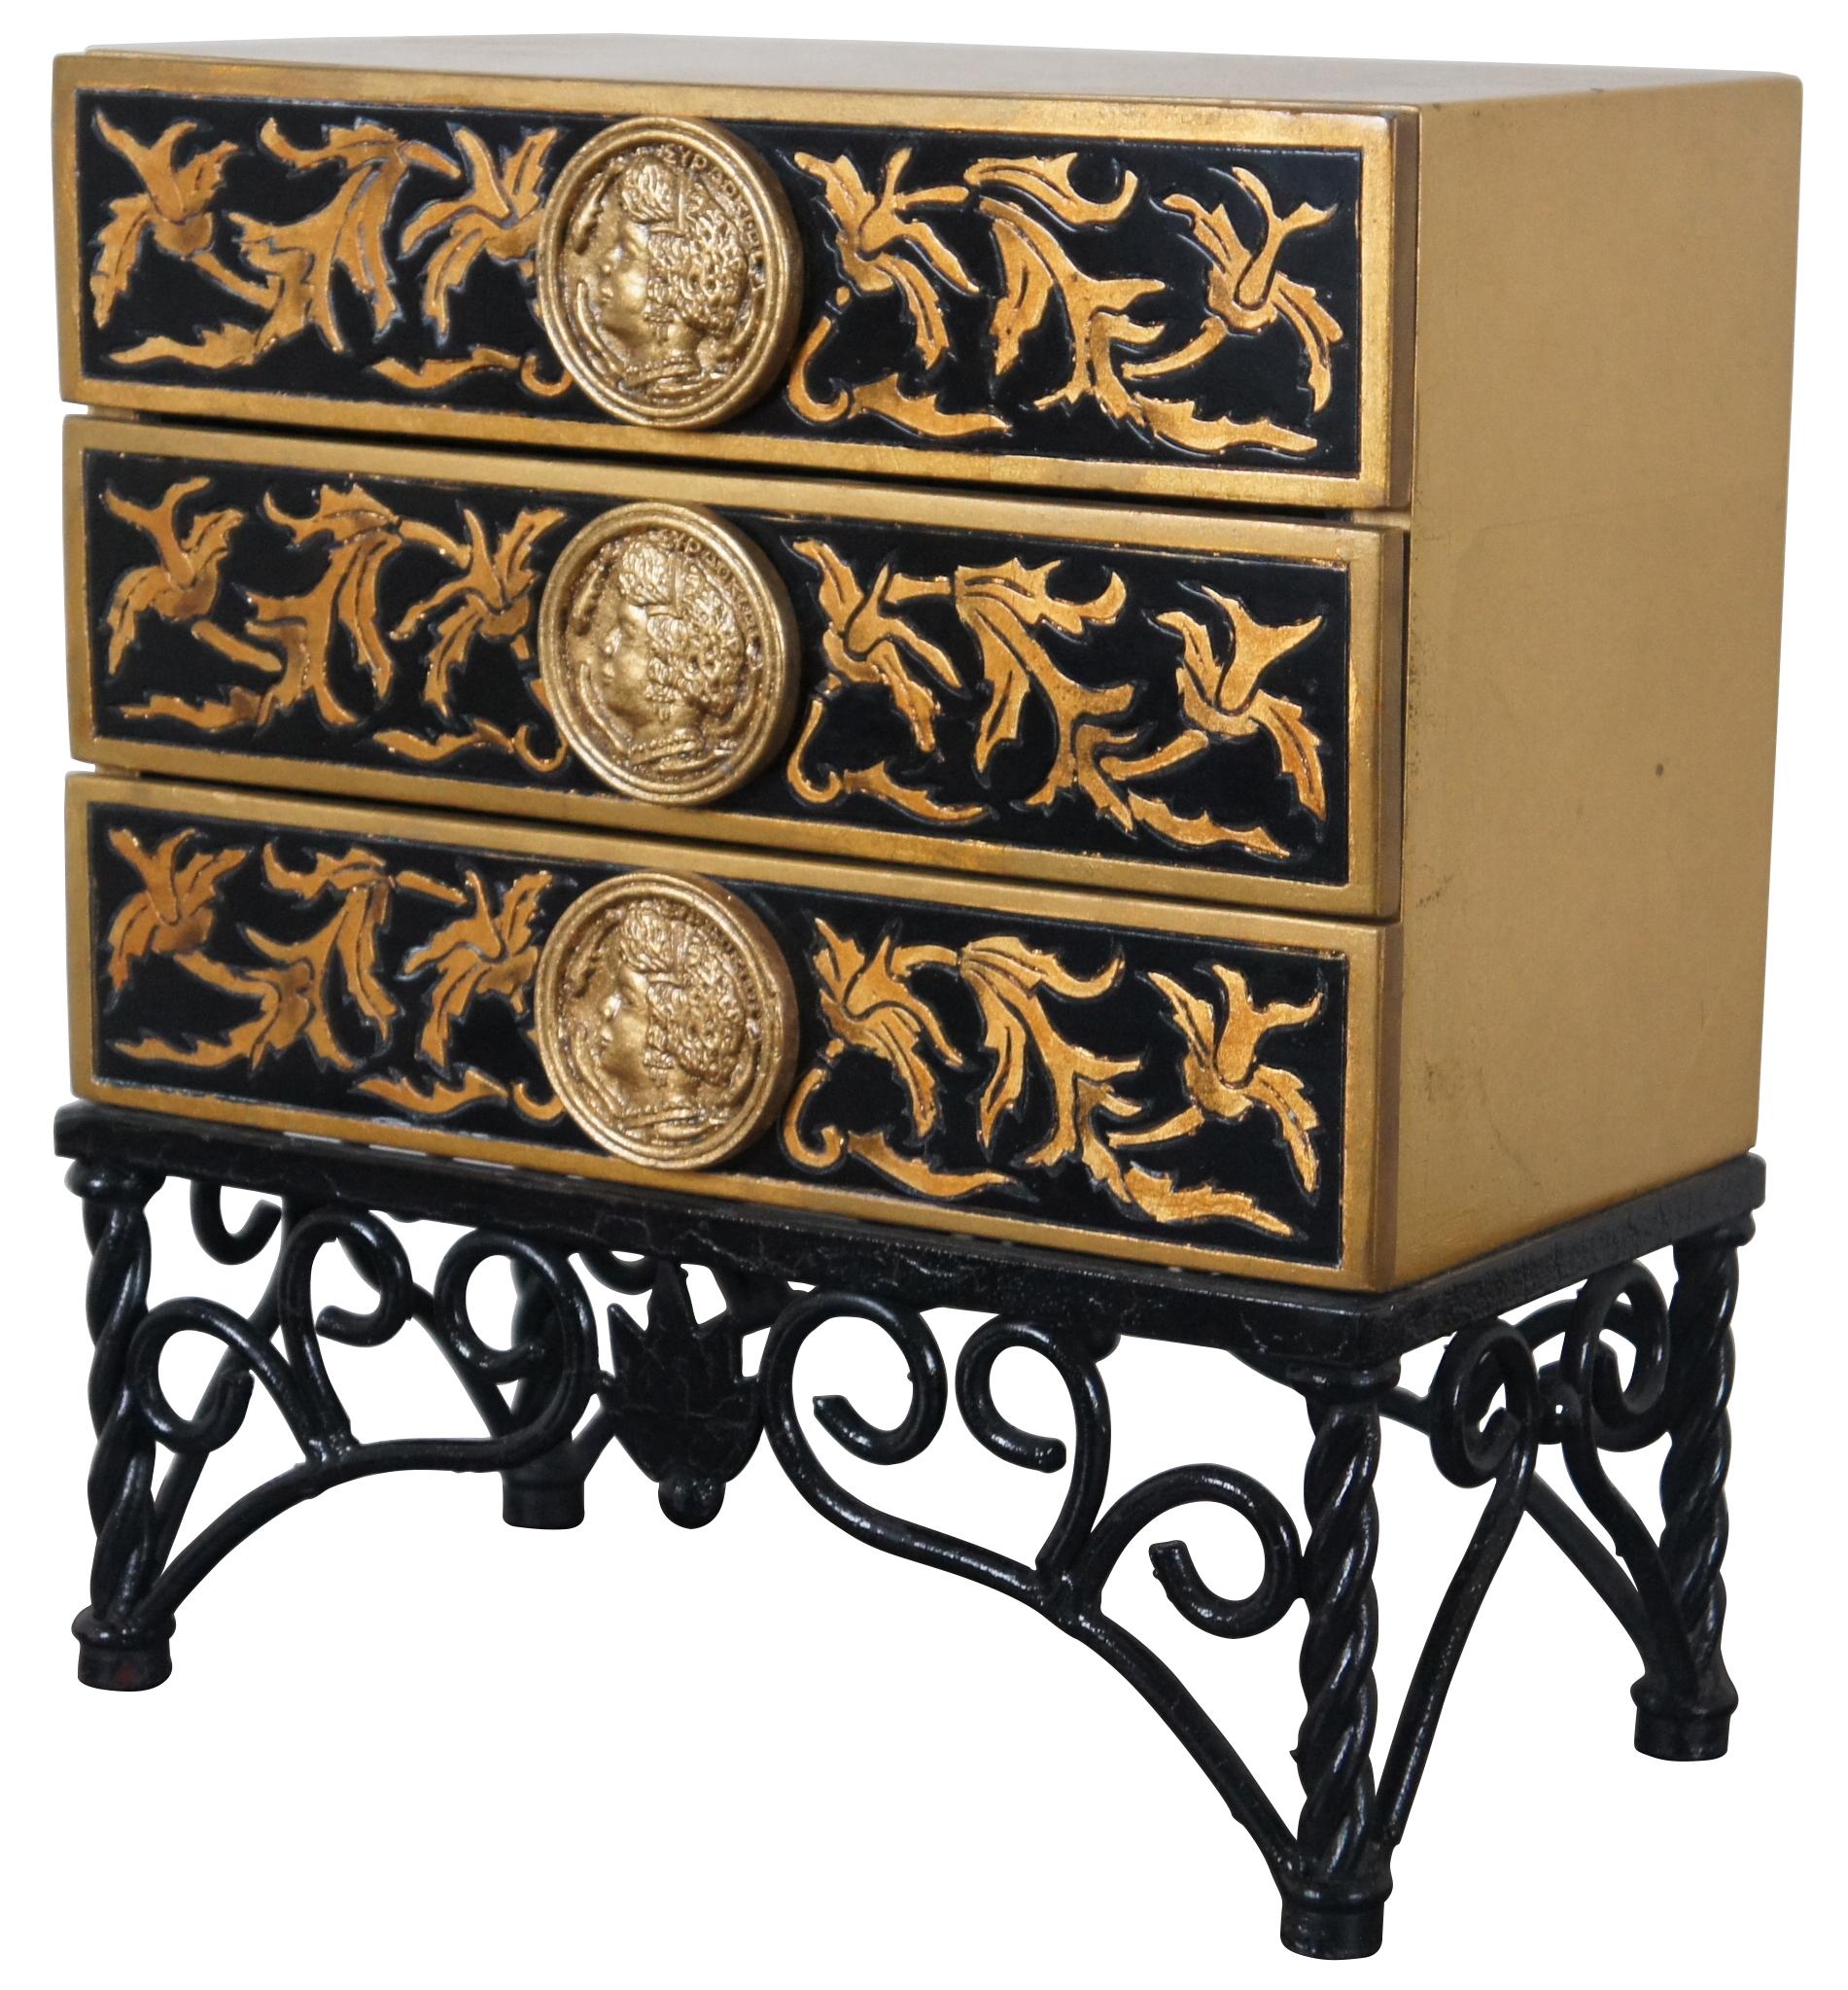 Three drawer table top jewelry box or storage chest. Neoclassical or Napoleonic style with gold and black lacquered drawers, mounted with medallions shaped like antique coins, mounted on a black wrought iron base.
  